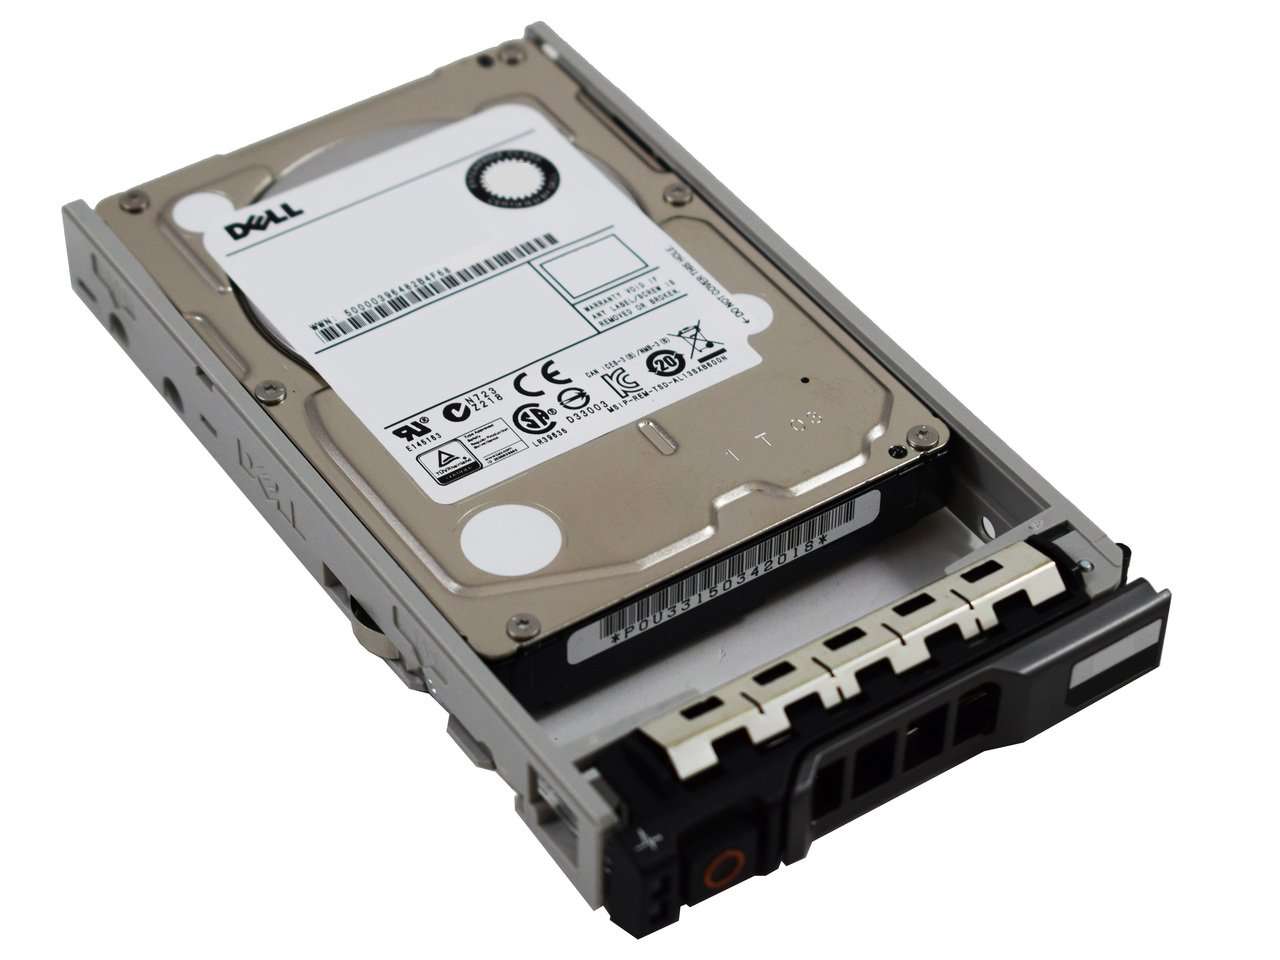 Dell G13 0DDRC3 600GB 10K RPM SAS 12Gb/s 512n 2.5" Manufacturer Recertified HDD